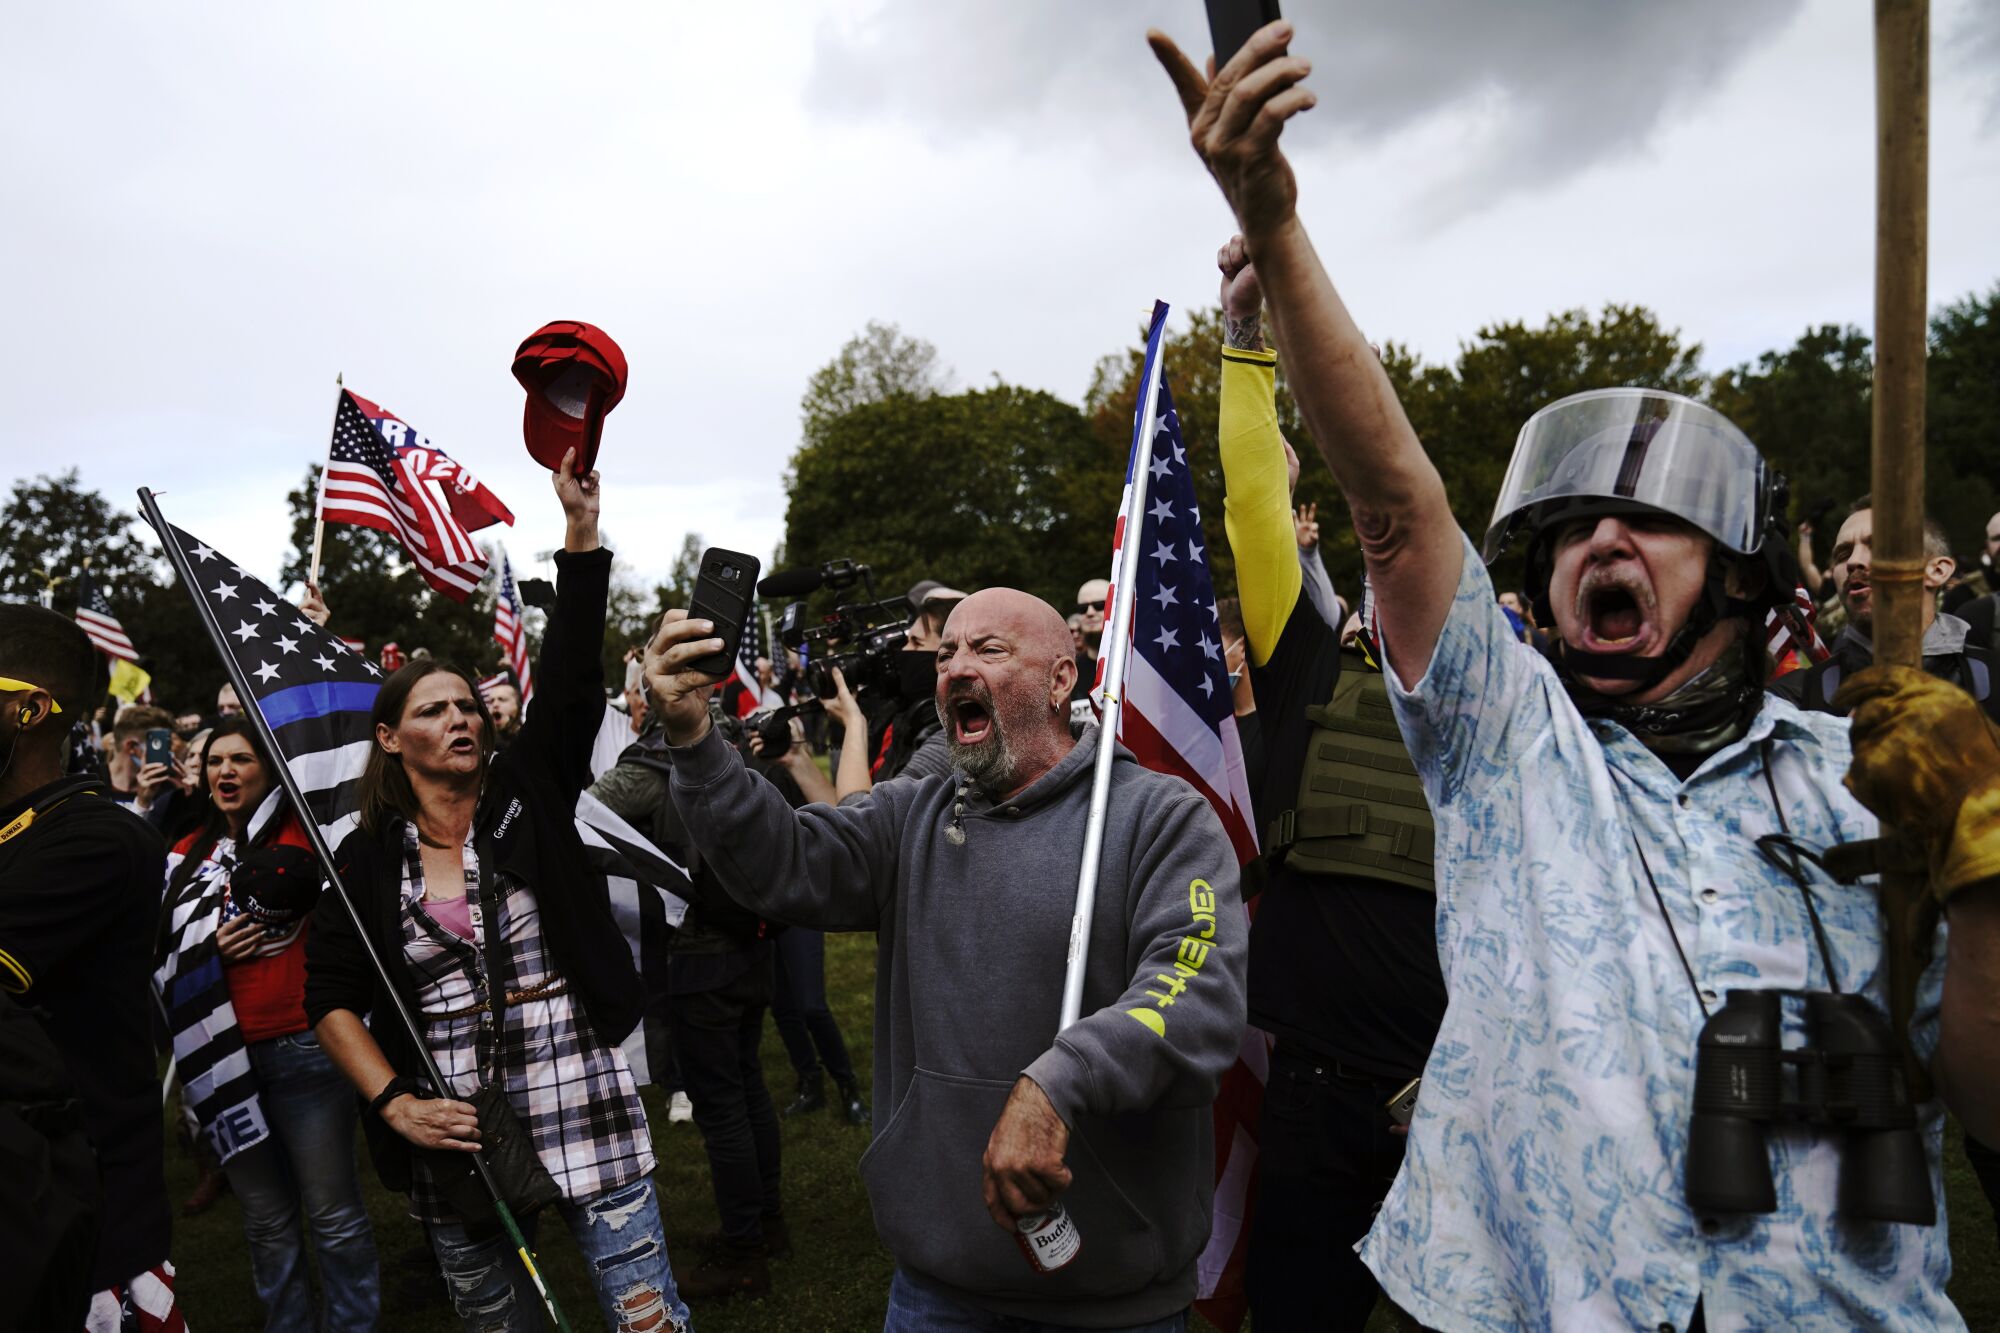 Right-wing demonstrators with U.S. flags and Trump gear yell and raise their arms in a park